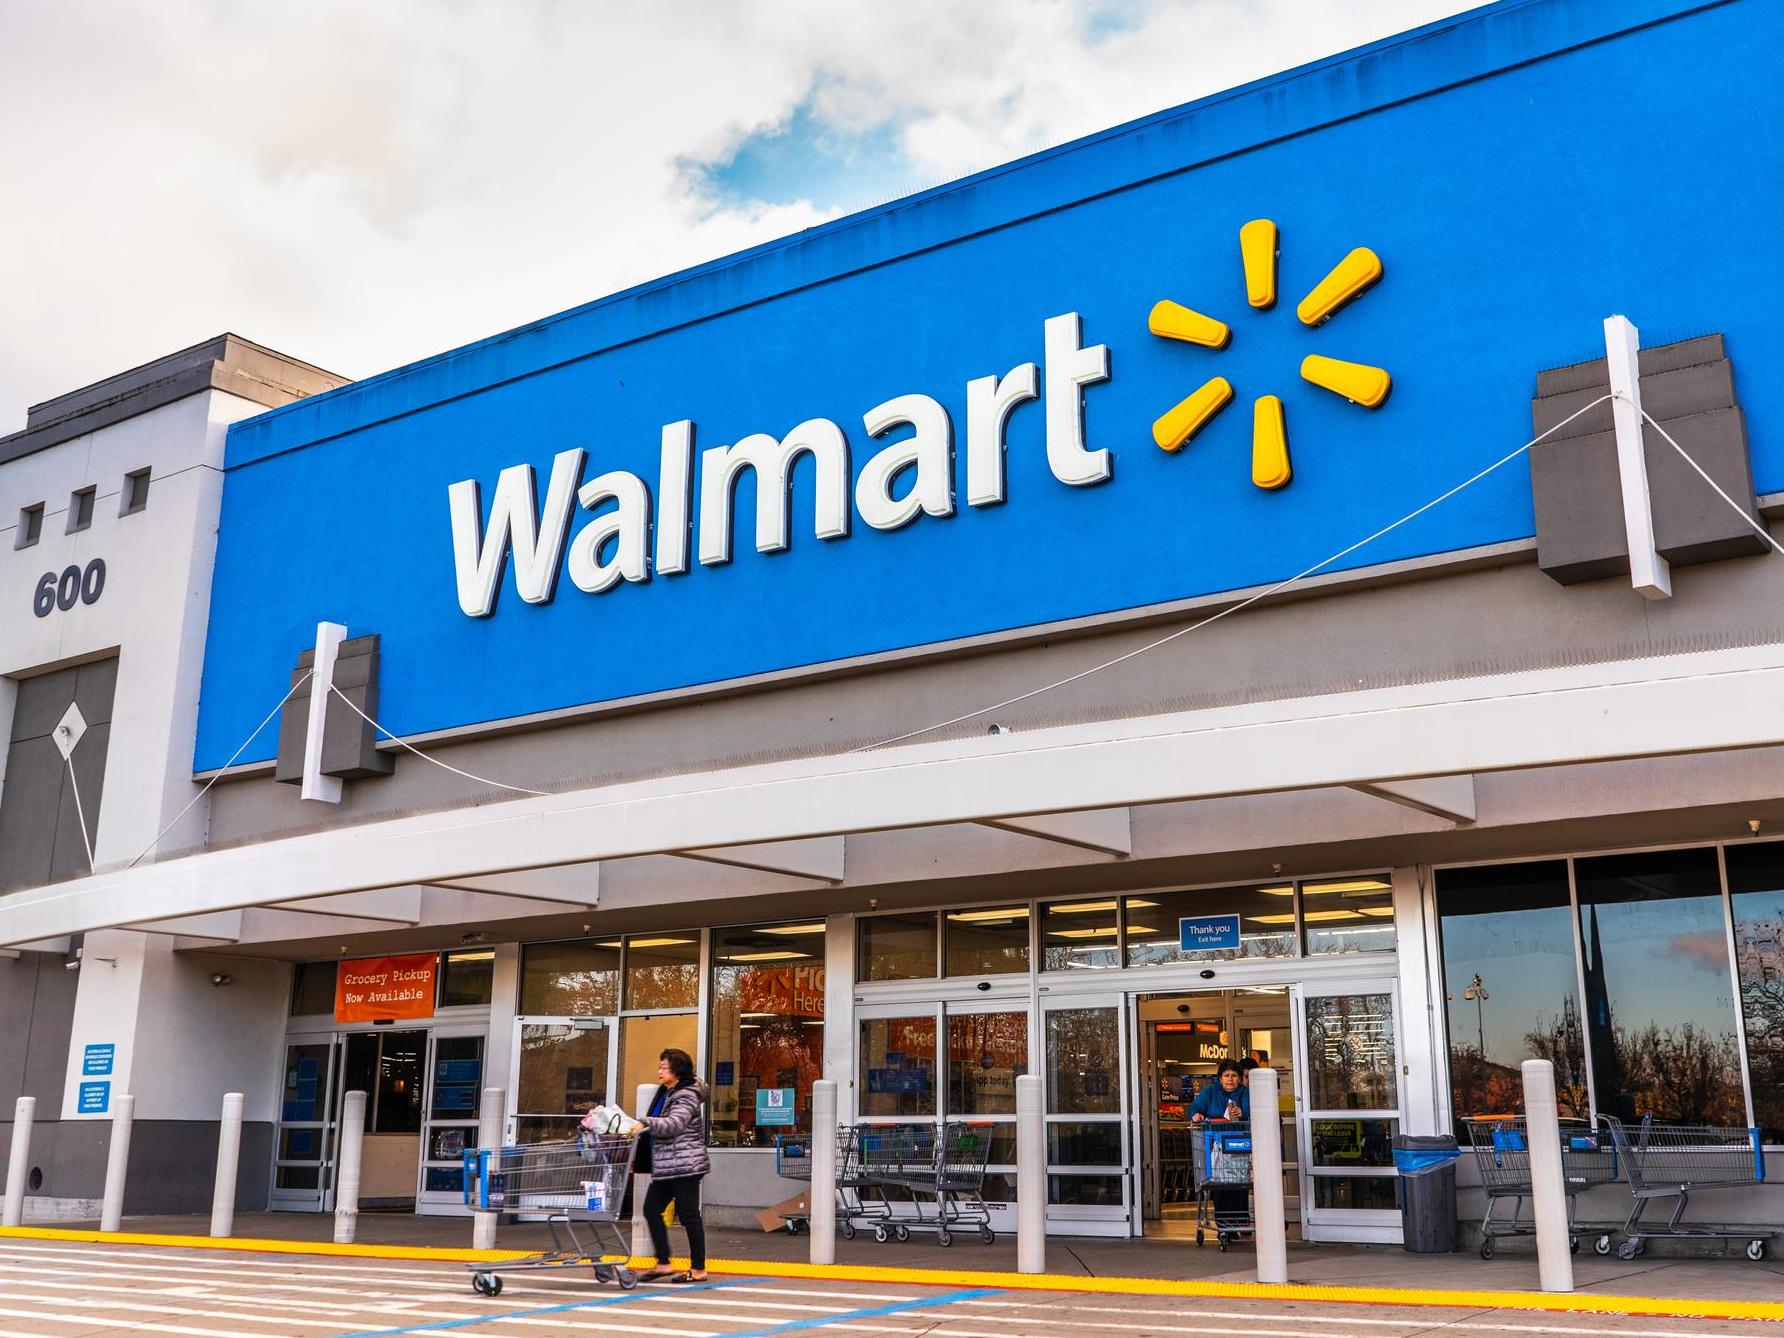 Walmart says that products are locked away in about a dozen shops across the US